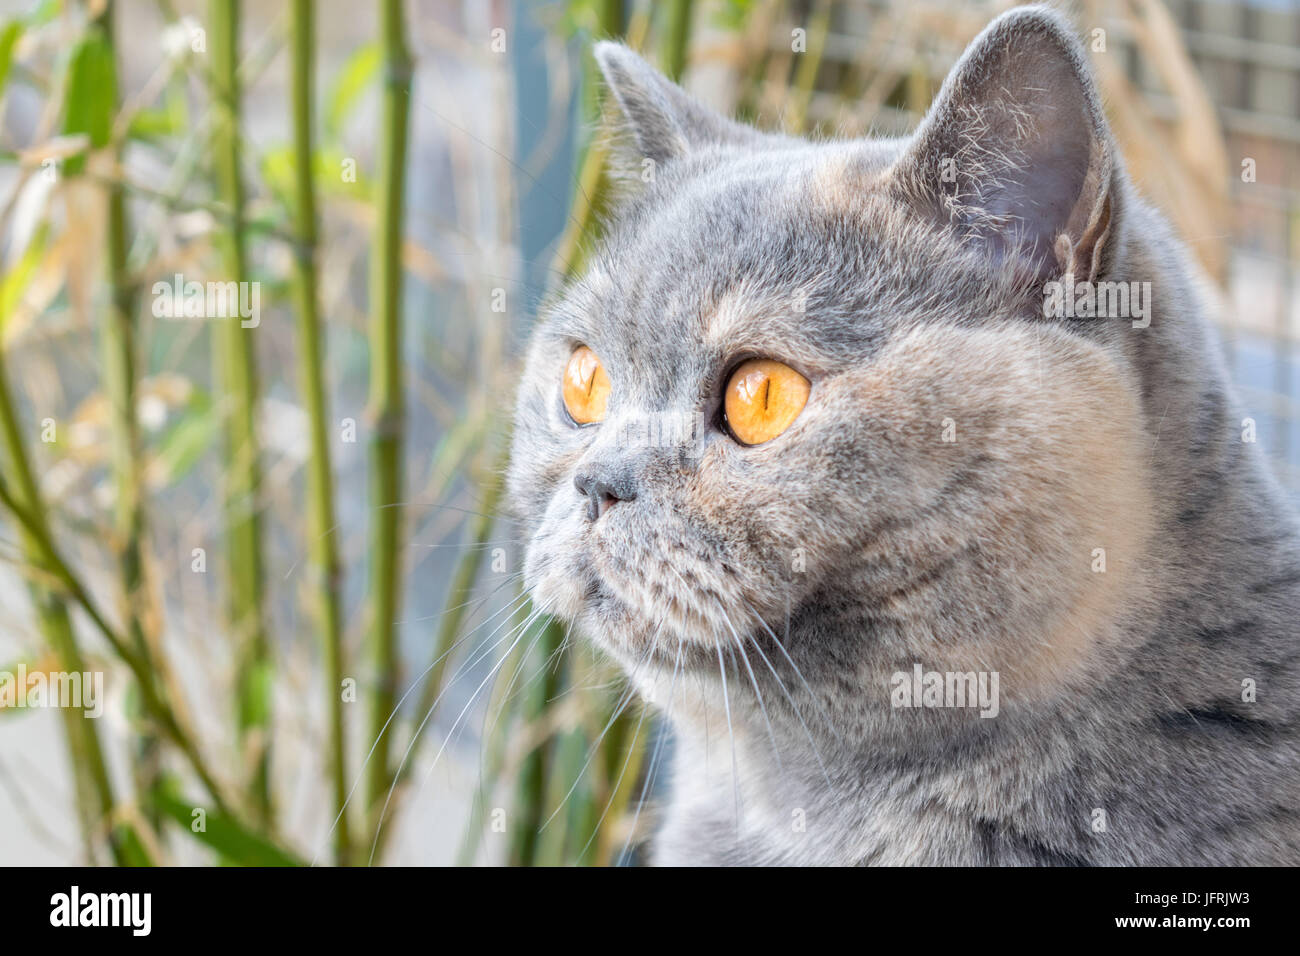 British Shorthair (BSH) cat daydreaming with bamboo in the background Stock Photo